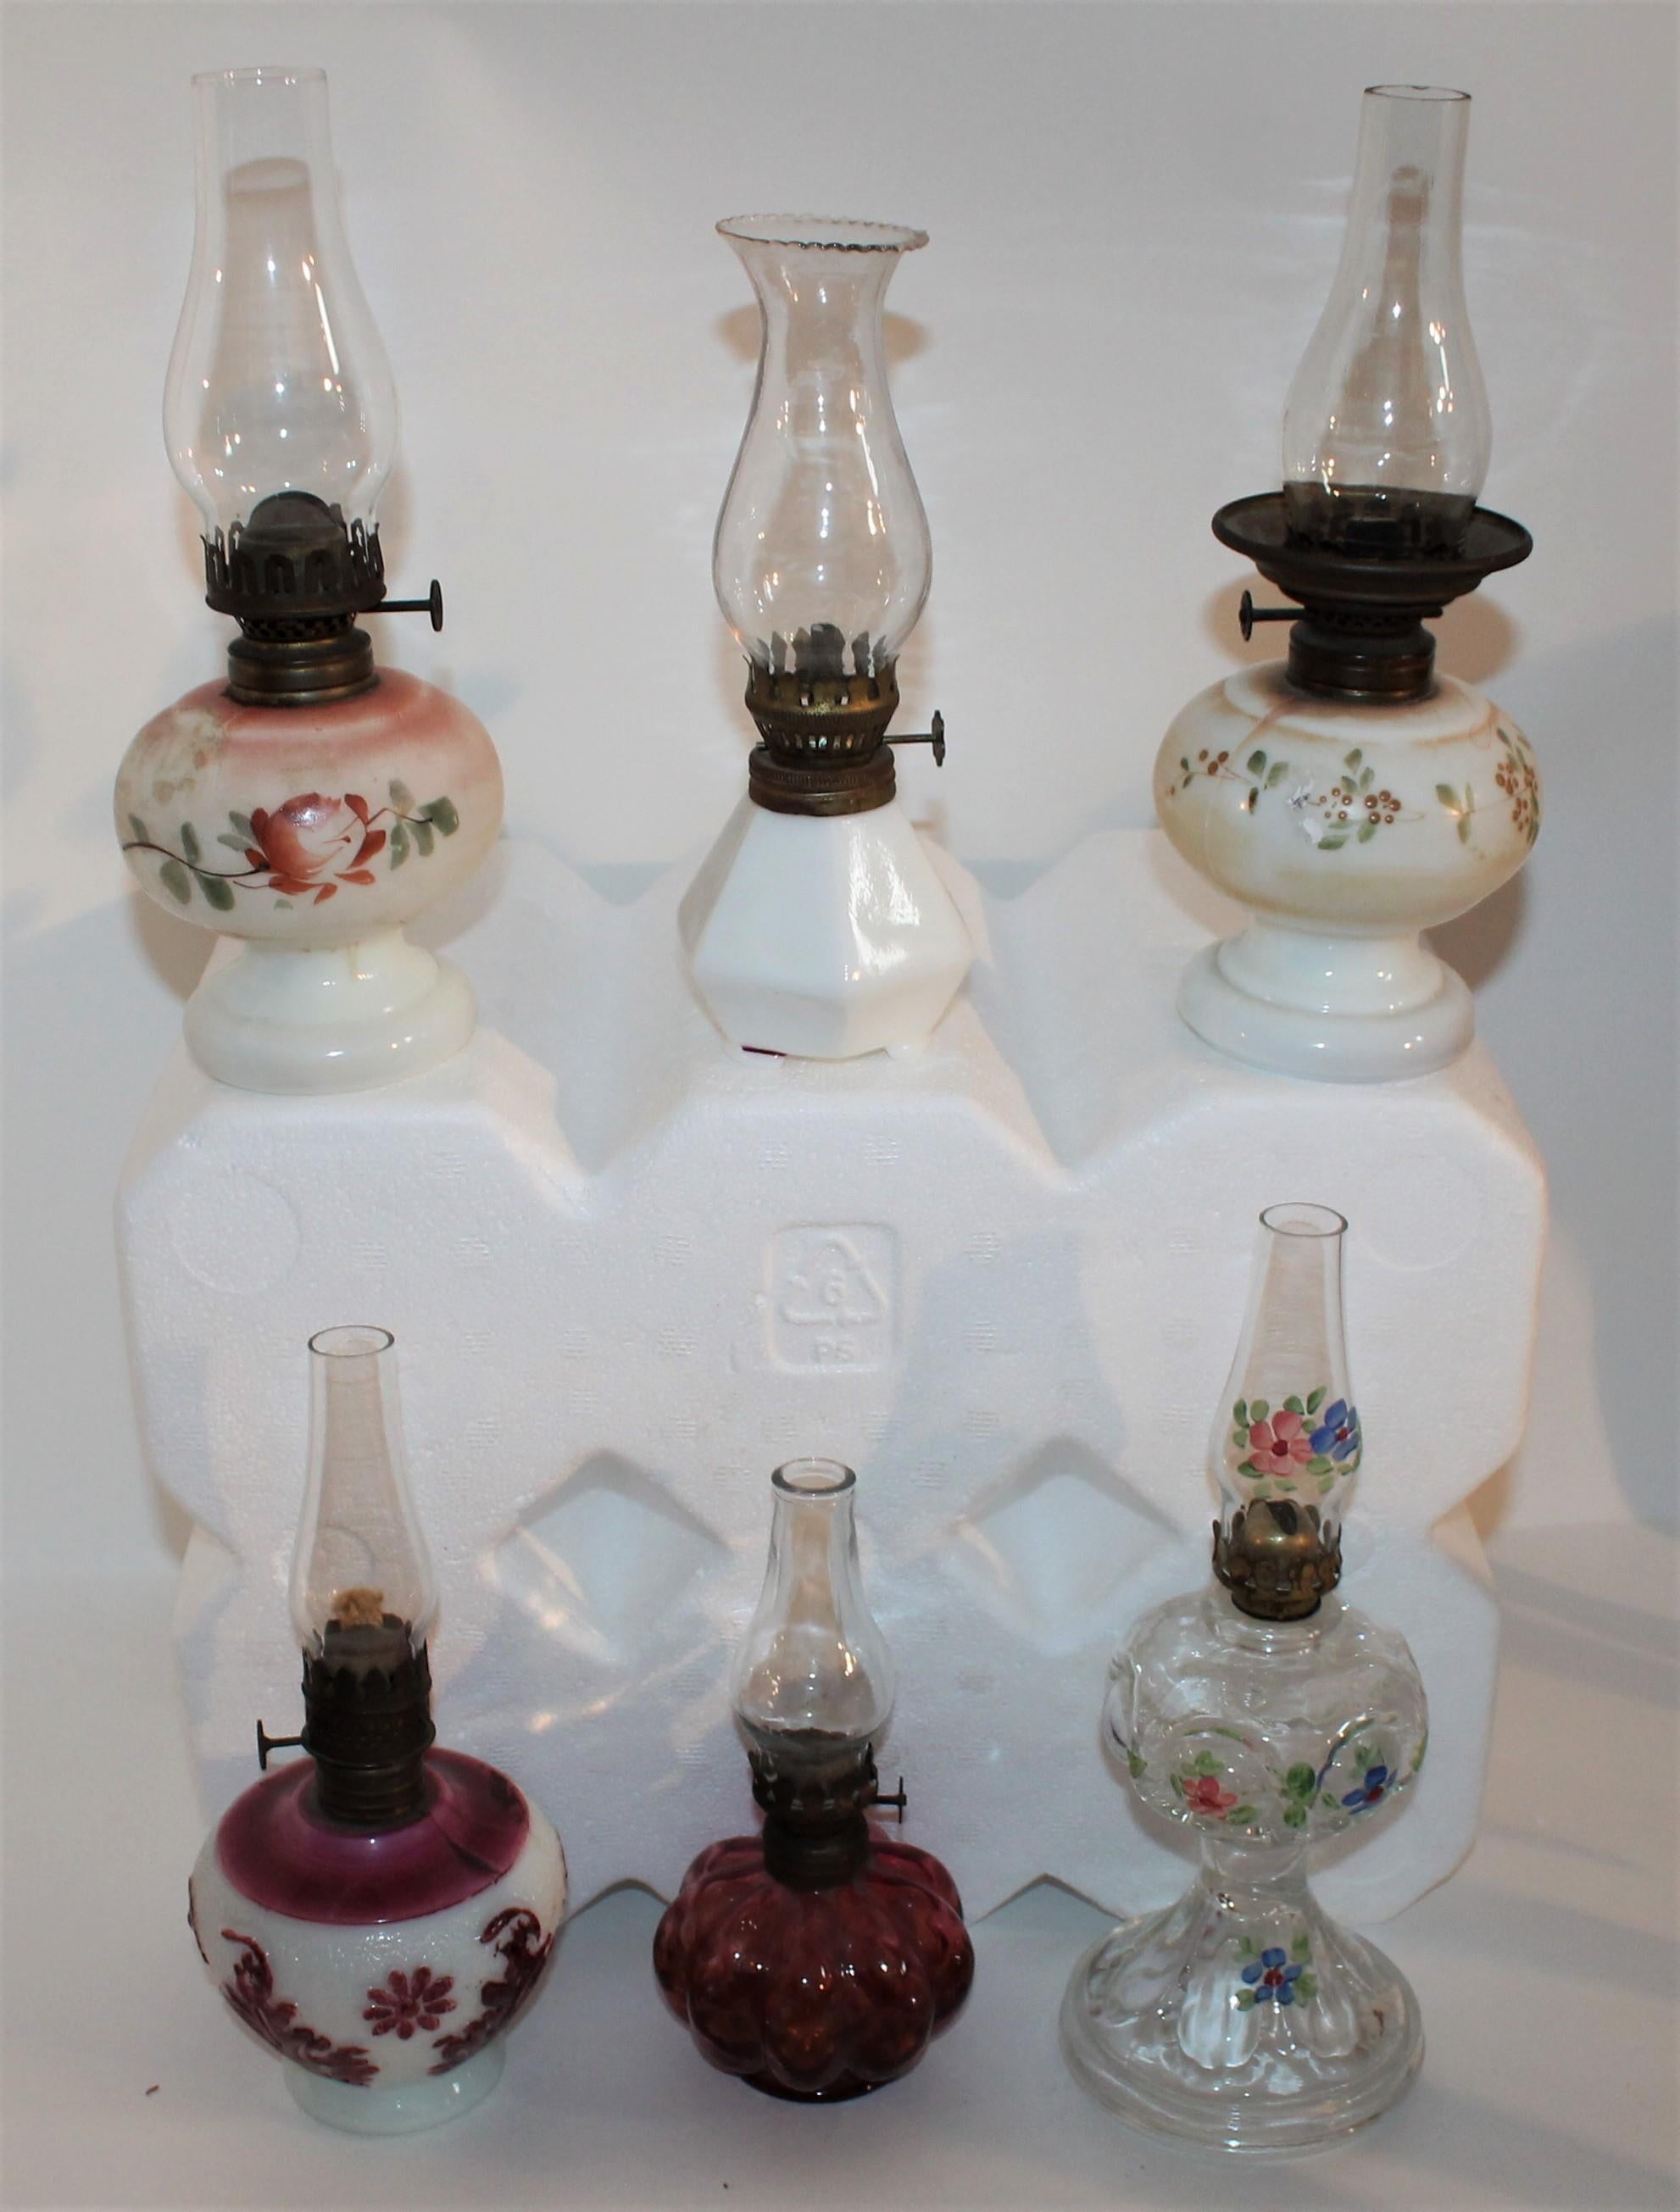 Collection of 19th century original painted glass and milk glass miniature oil lamps. Sold as a collection of six.

Largest gas light measures- 3.5 inches in diameter and 9 inches in height with bulb.
Smallest gas light measures-3 inches in